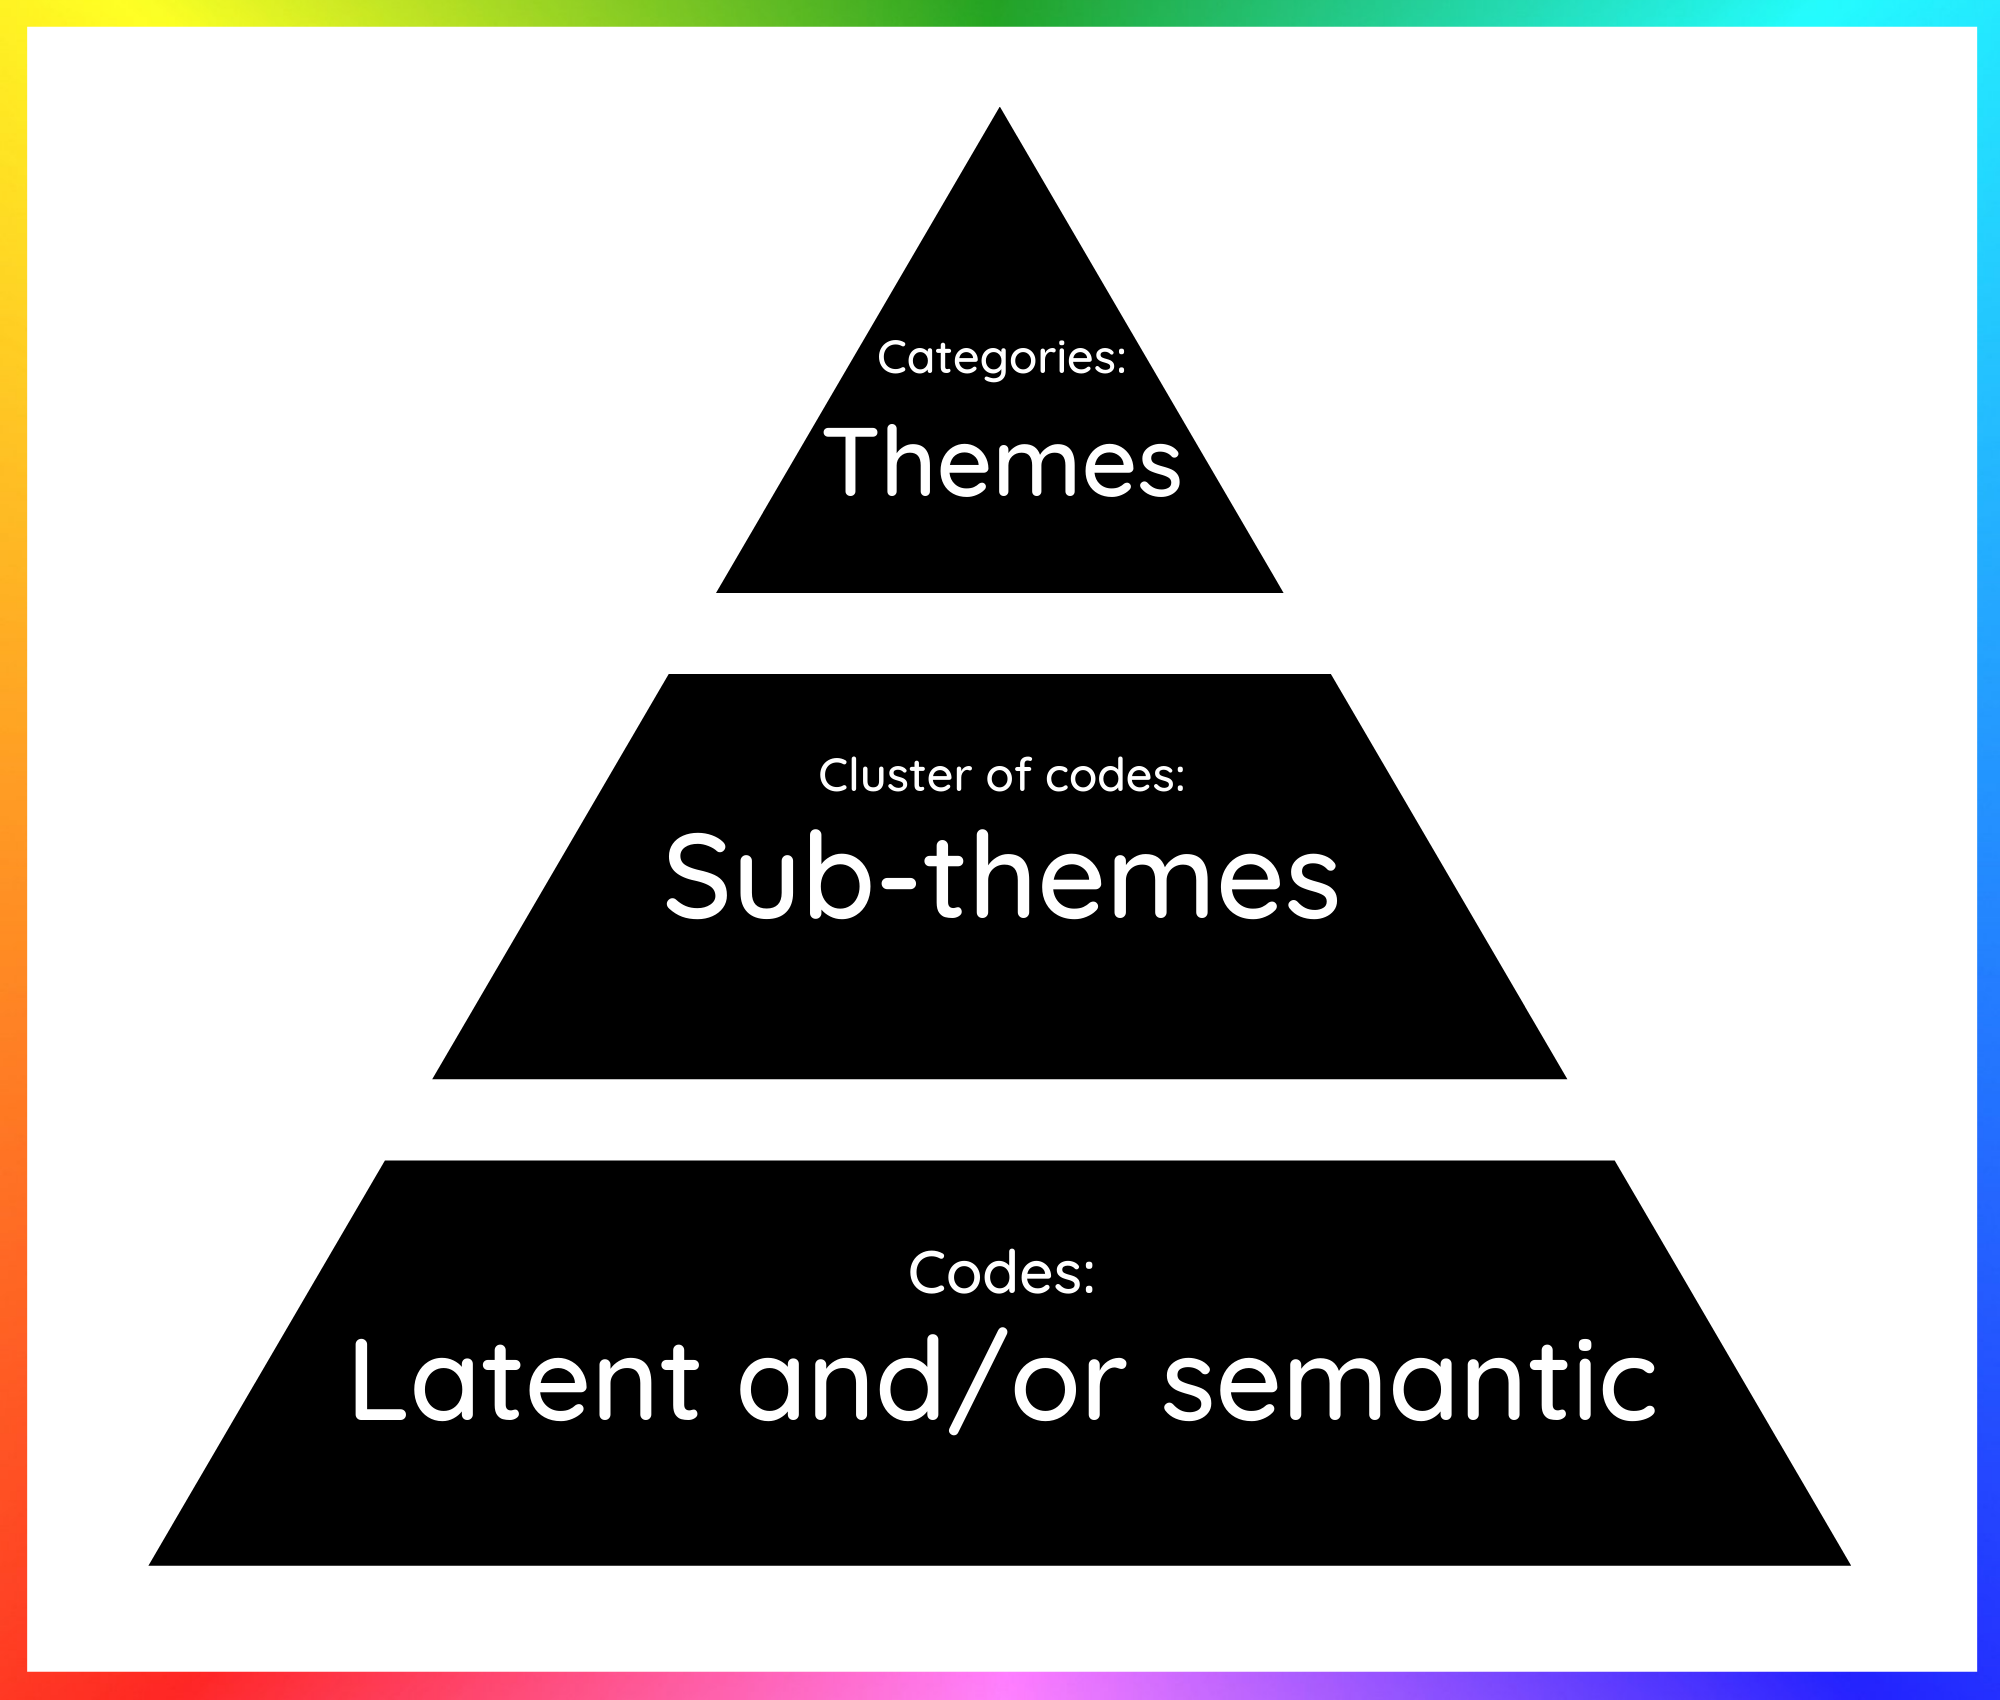 Hierarchical relationship between codes, sub-themes and themes